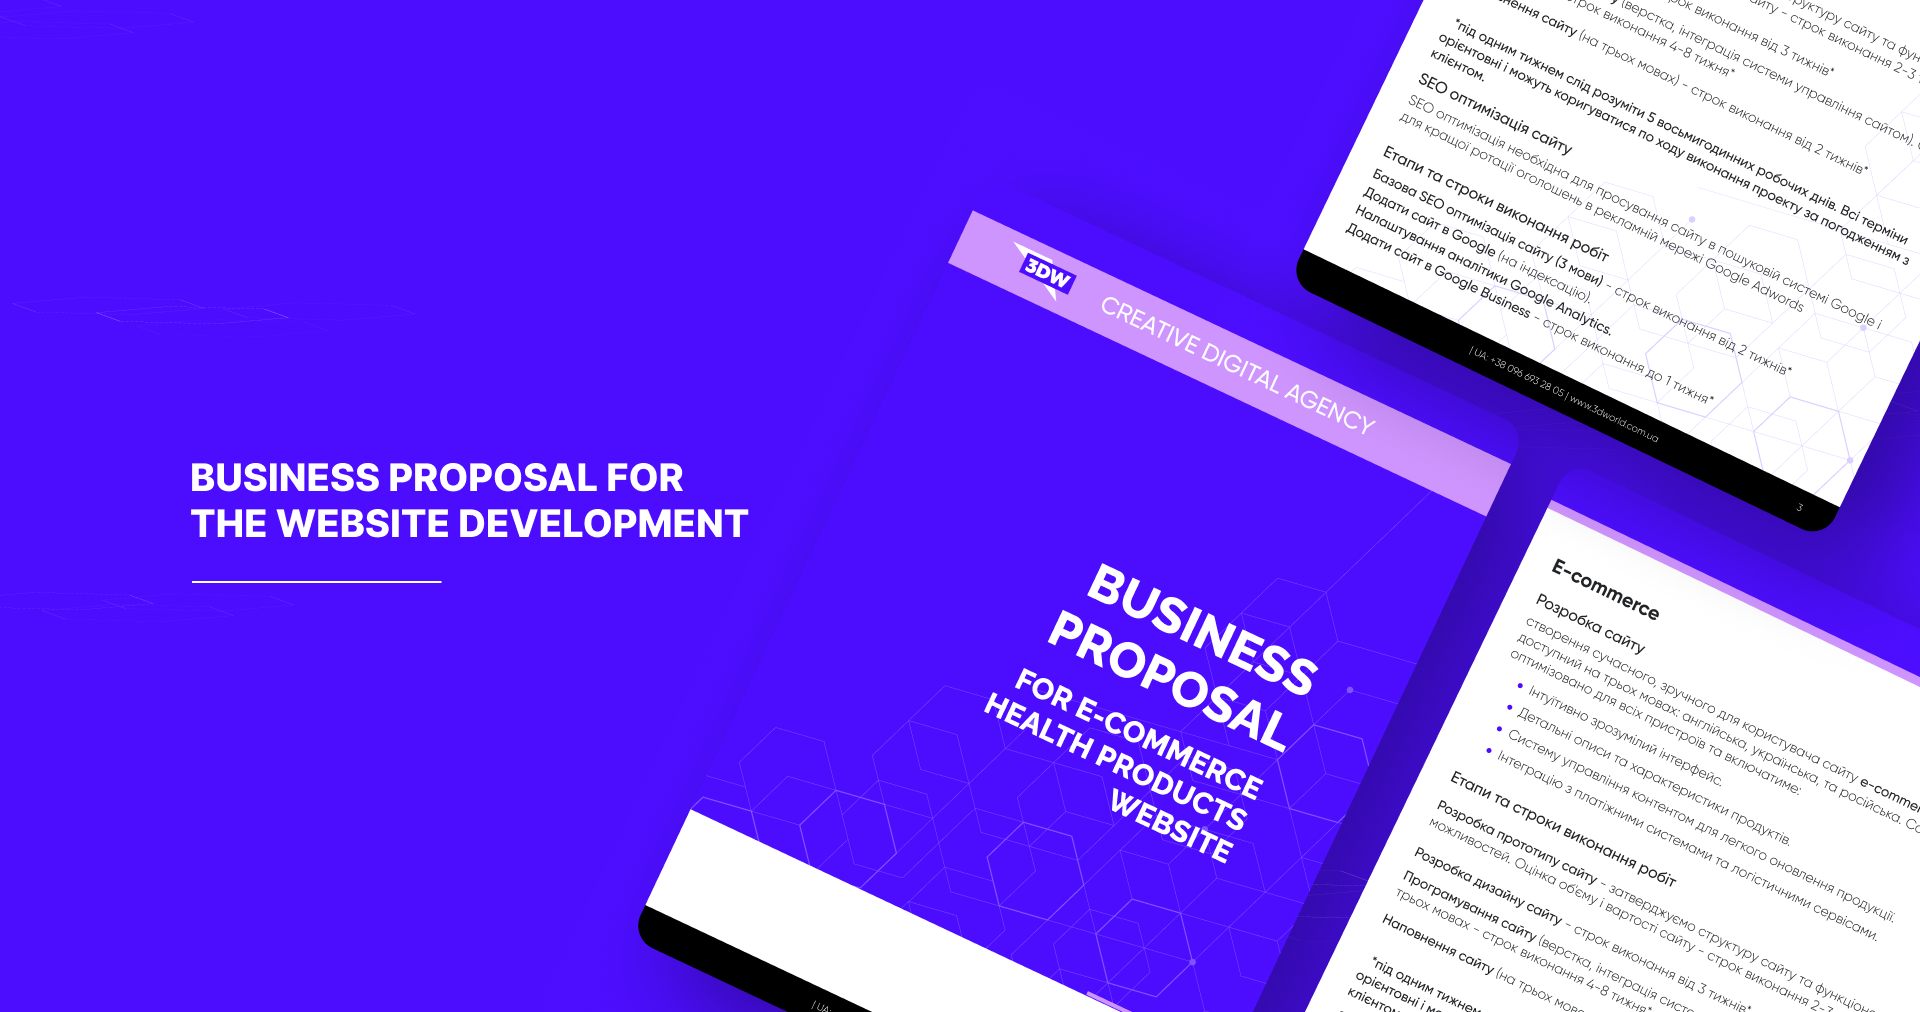 Business Proposal for E-Commerce Cover